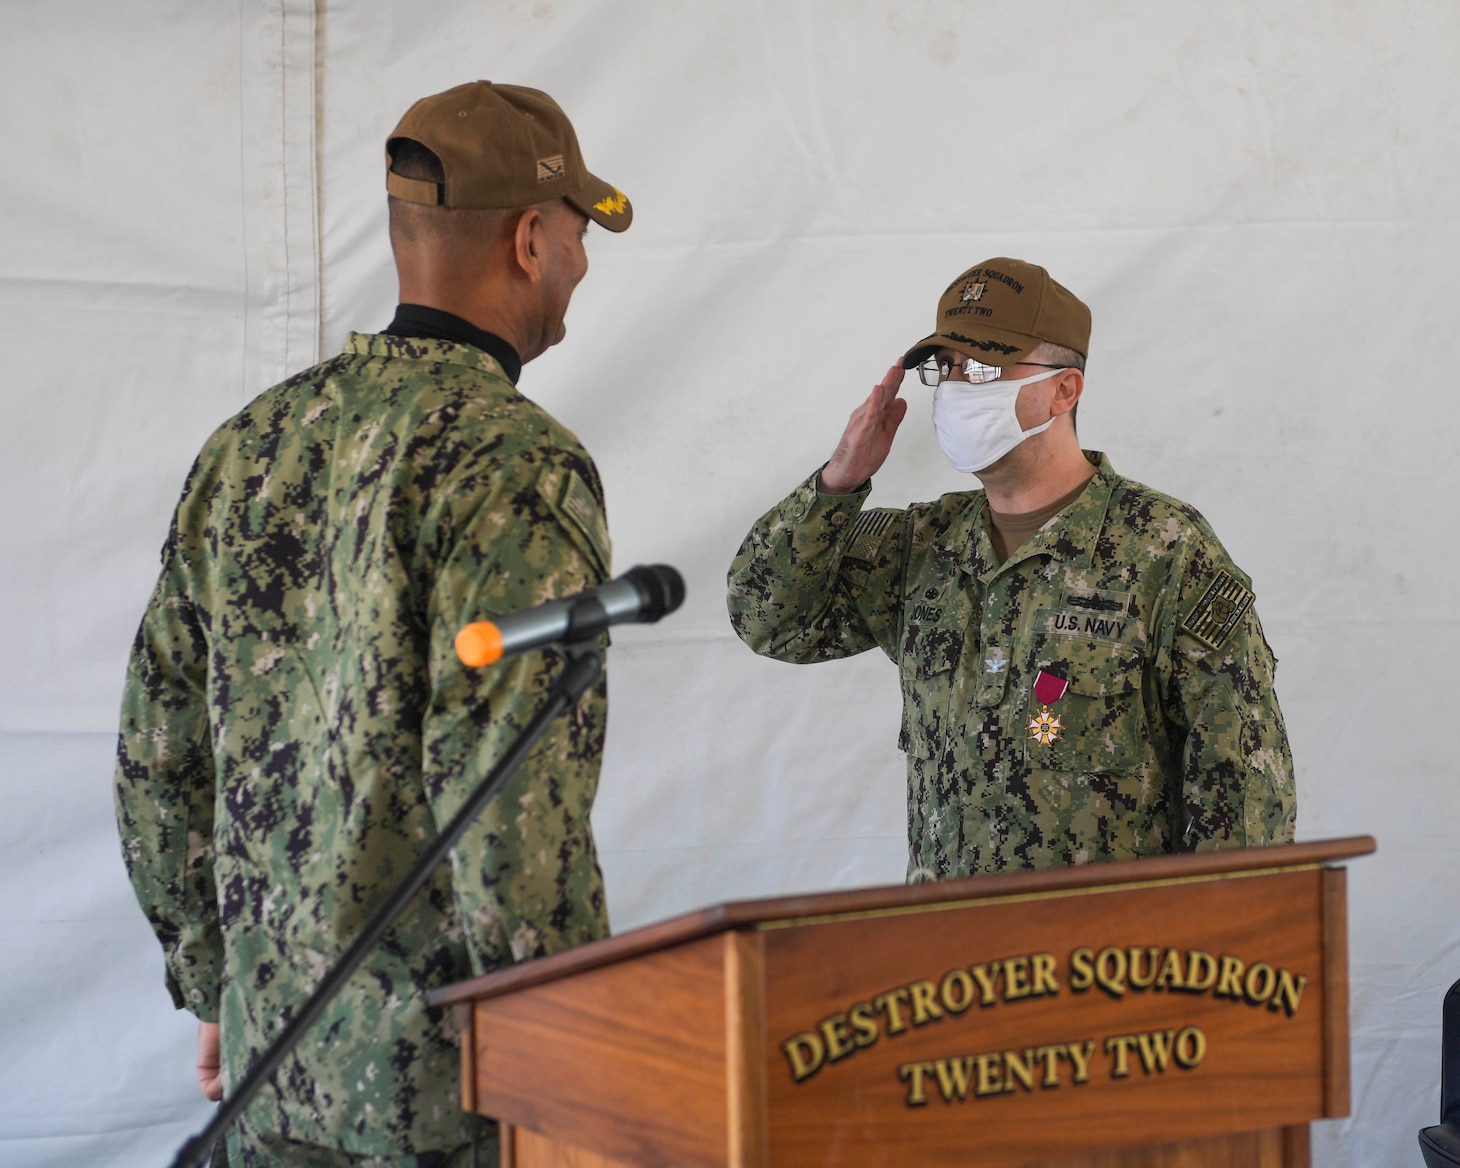 Capt. Scott Jones, right, salutes Capt. Milciades �Tony� Then, right, as Then relieves Jones as commodore, Destroyer Squadron (DESRON) 22 during the DESRON 22 change of command ceremony on board the Arleigh Burke-class guided-missile destroyer USS Mitscher (DDG 57). DESRON 22 consists of guided-missile destroyers, including Mitscher, USS Laboon (DDG 58), USS Ramage (DDG 61), and USS Mahan (DDG 72). Established in March 1943, DESRON 22 is one of the oldest destroyer squadrons in the U.S. Navy. (U.S. Navy photo by Mass Communication Specialist 1st Class Jacob Milham/Released)